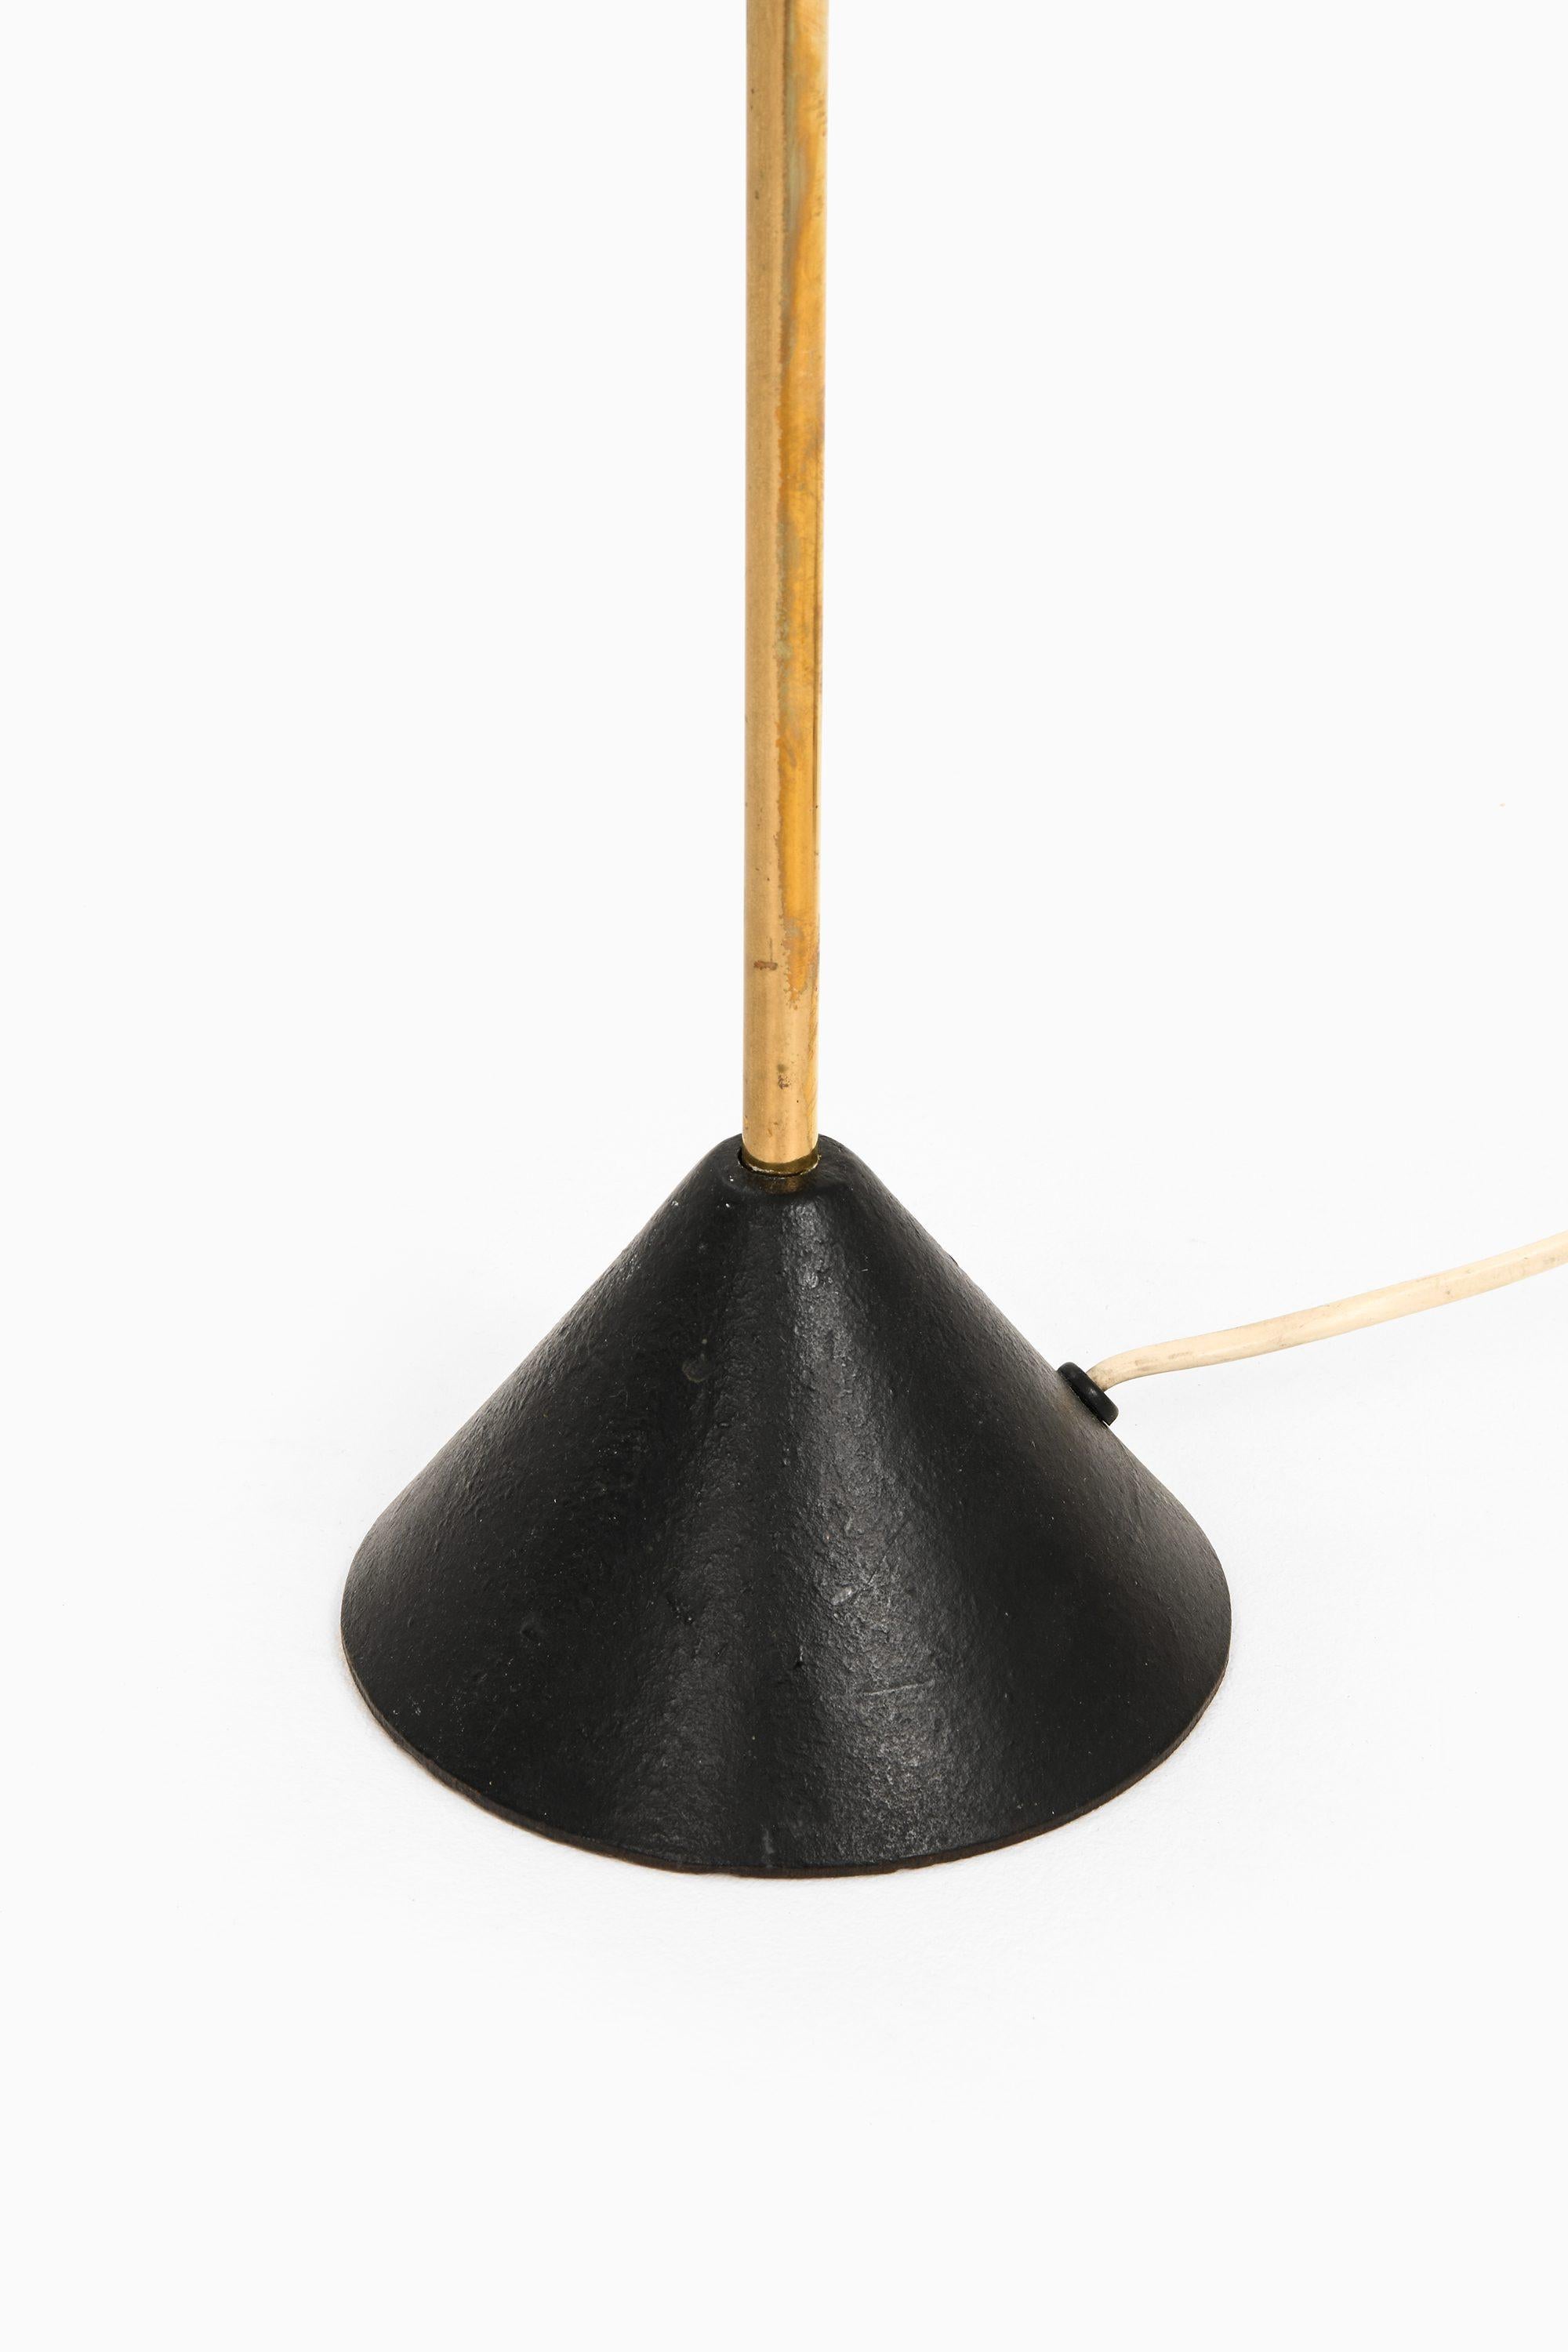 Swedish Large Floor Lamp in Brass, Black and White Metal by Hans-Agne Jakobsson, 1950's For Sale